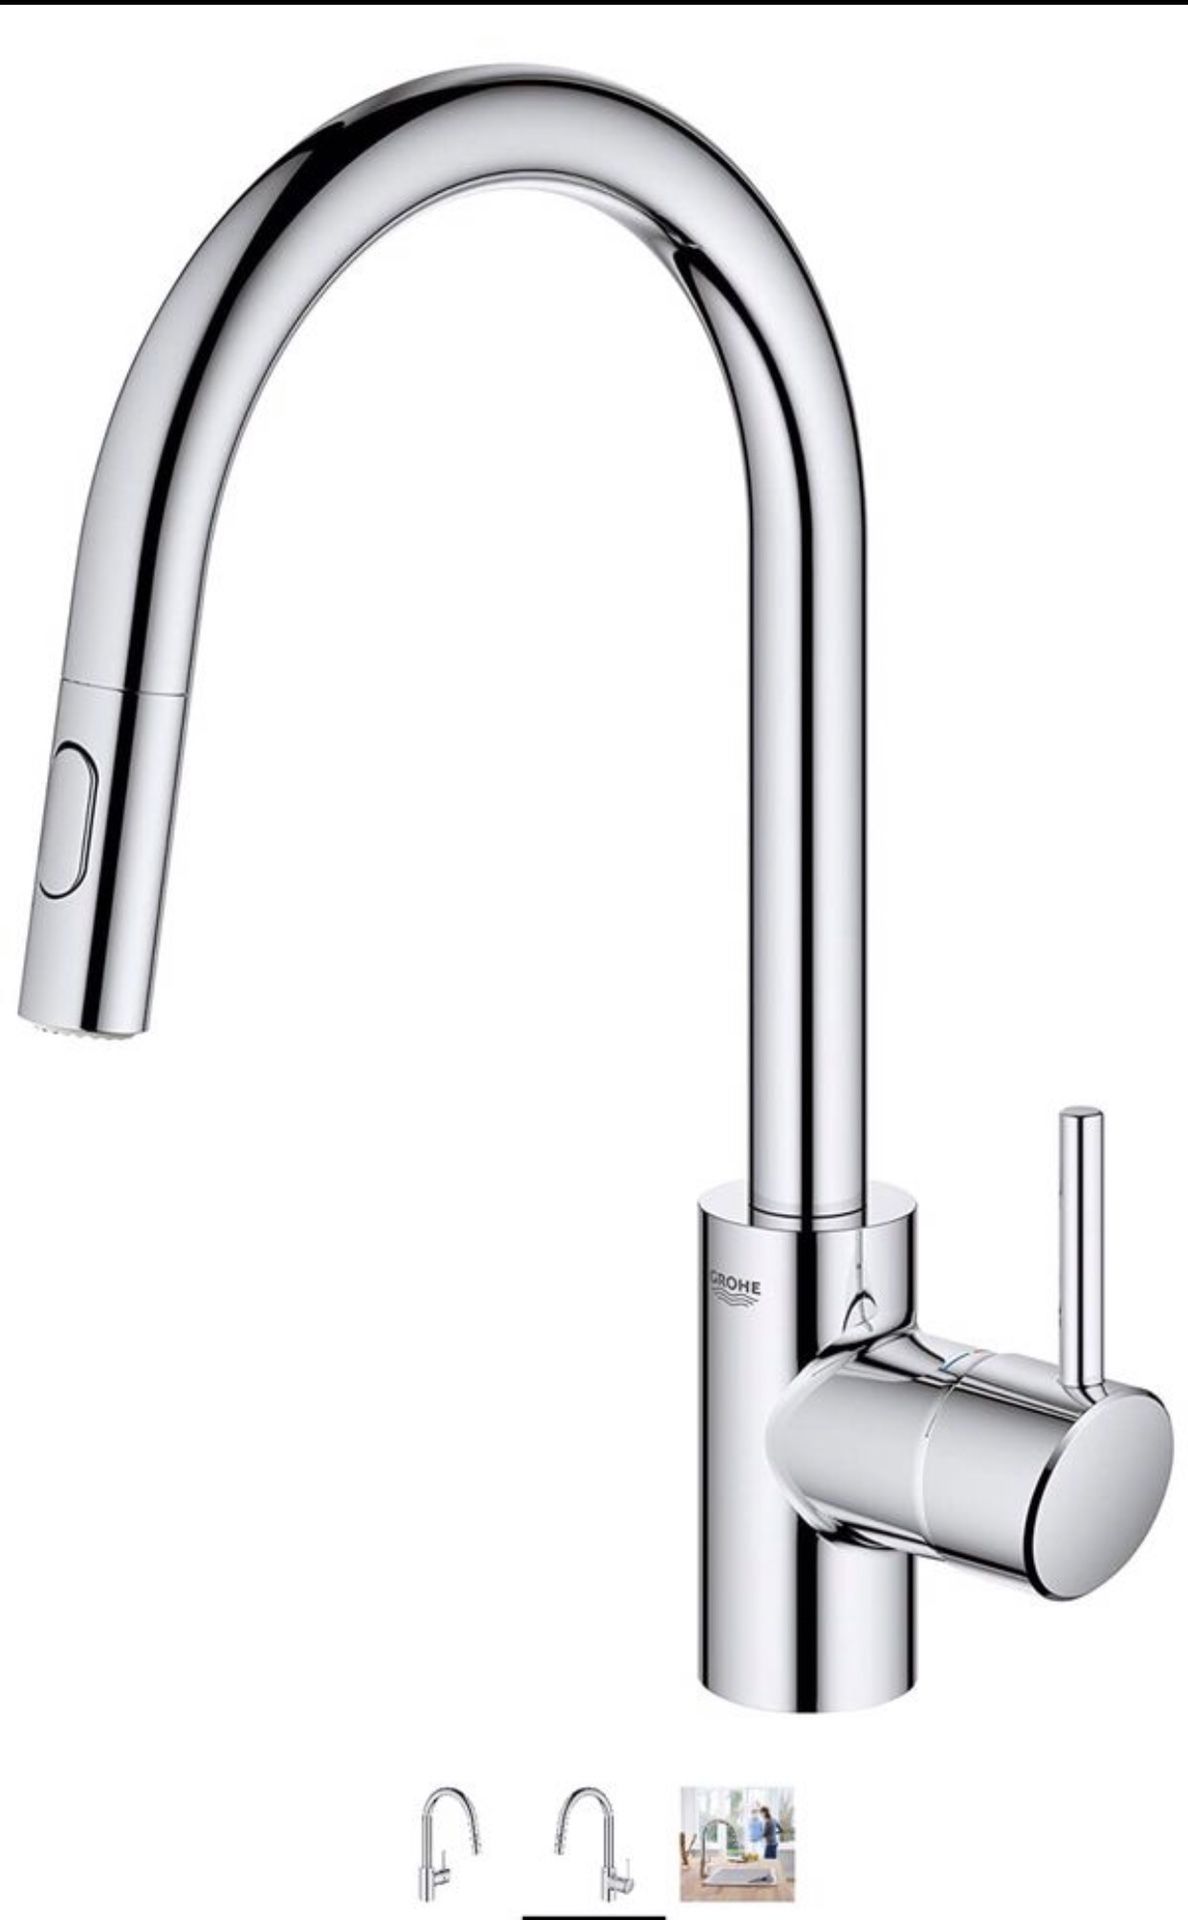 Brand New Grohe Kitchen Faucet